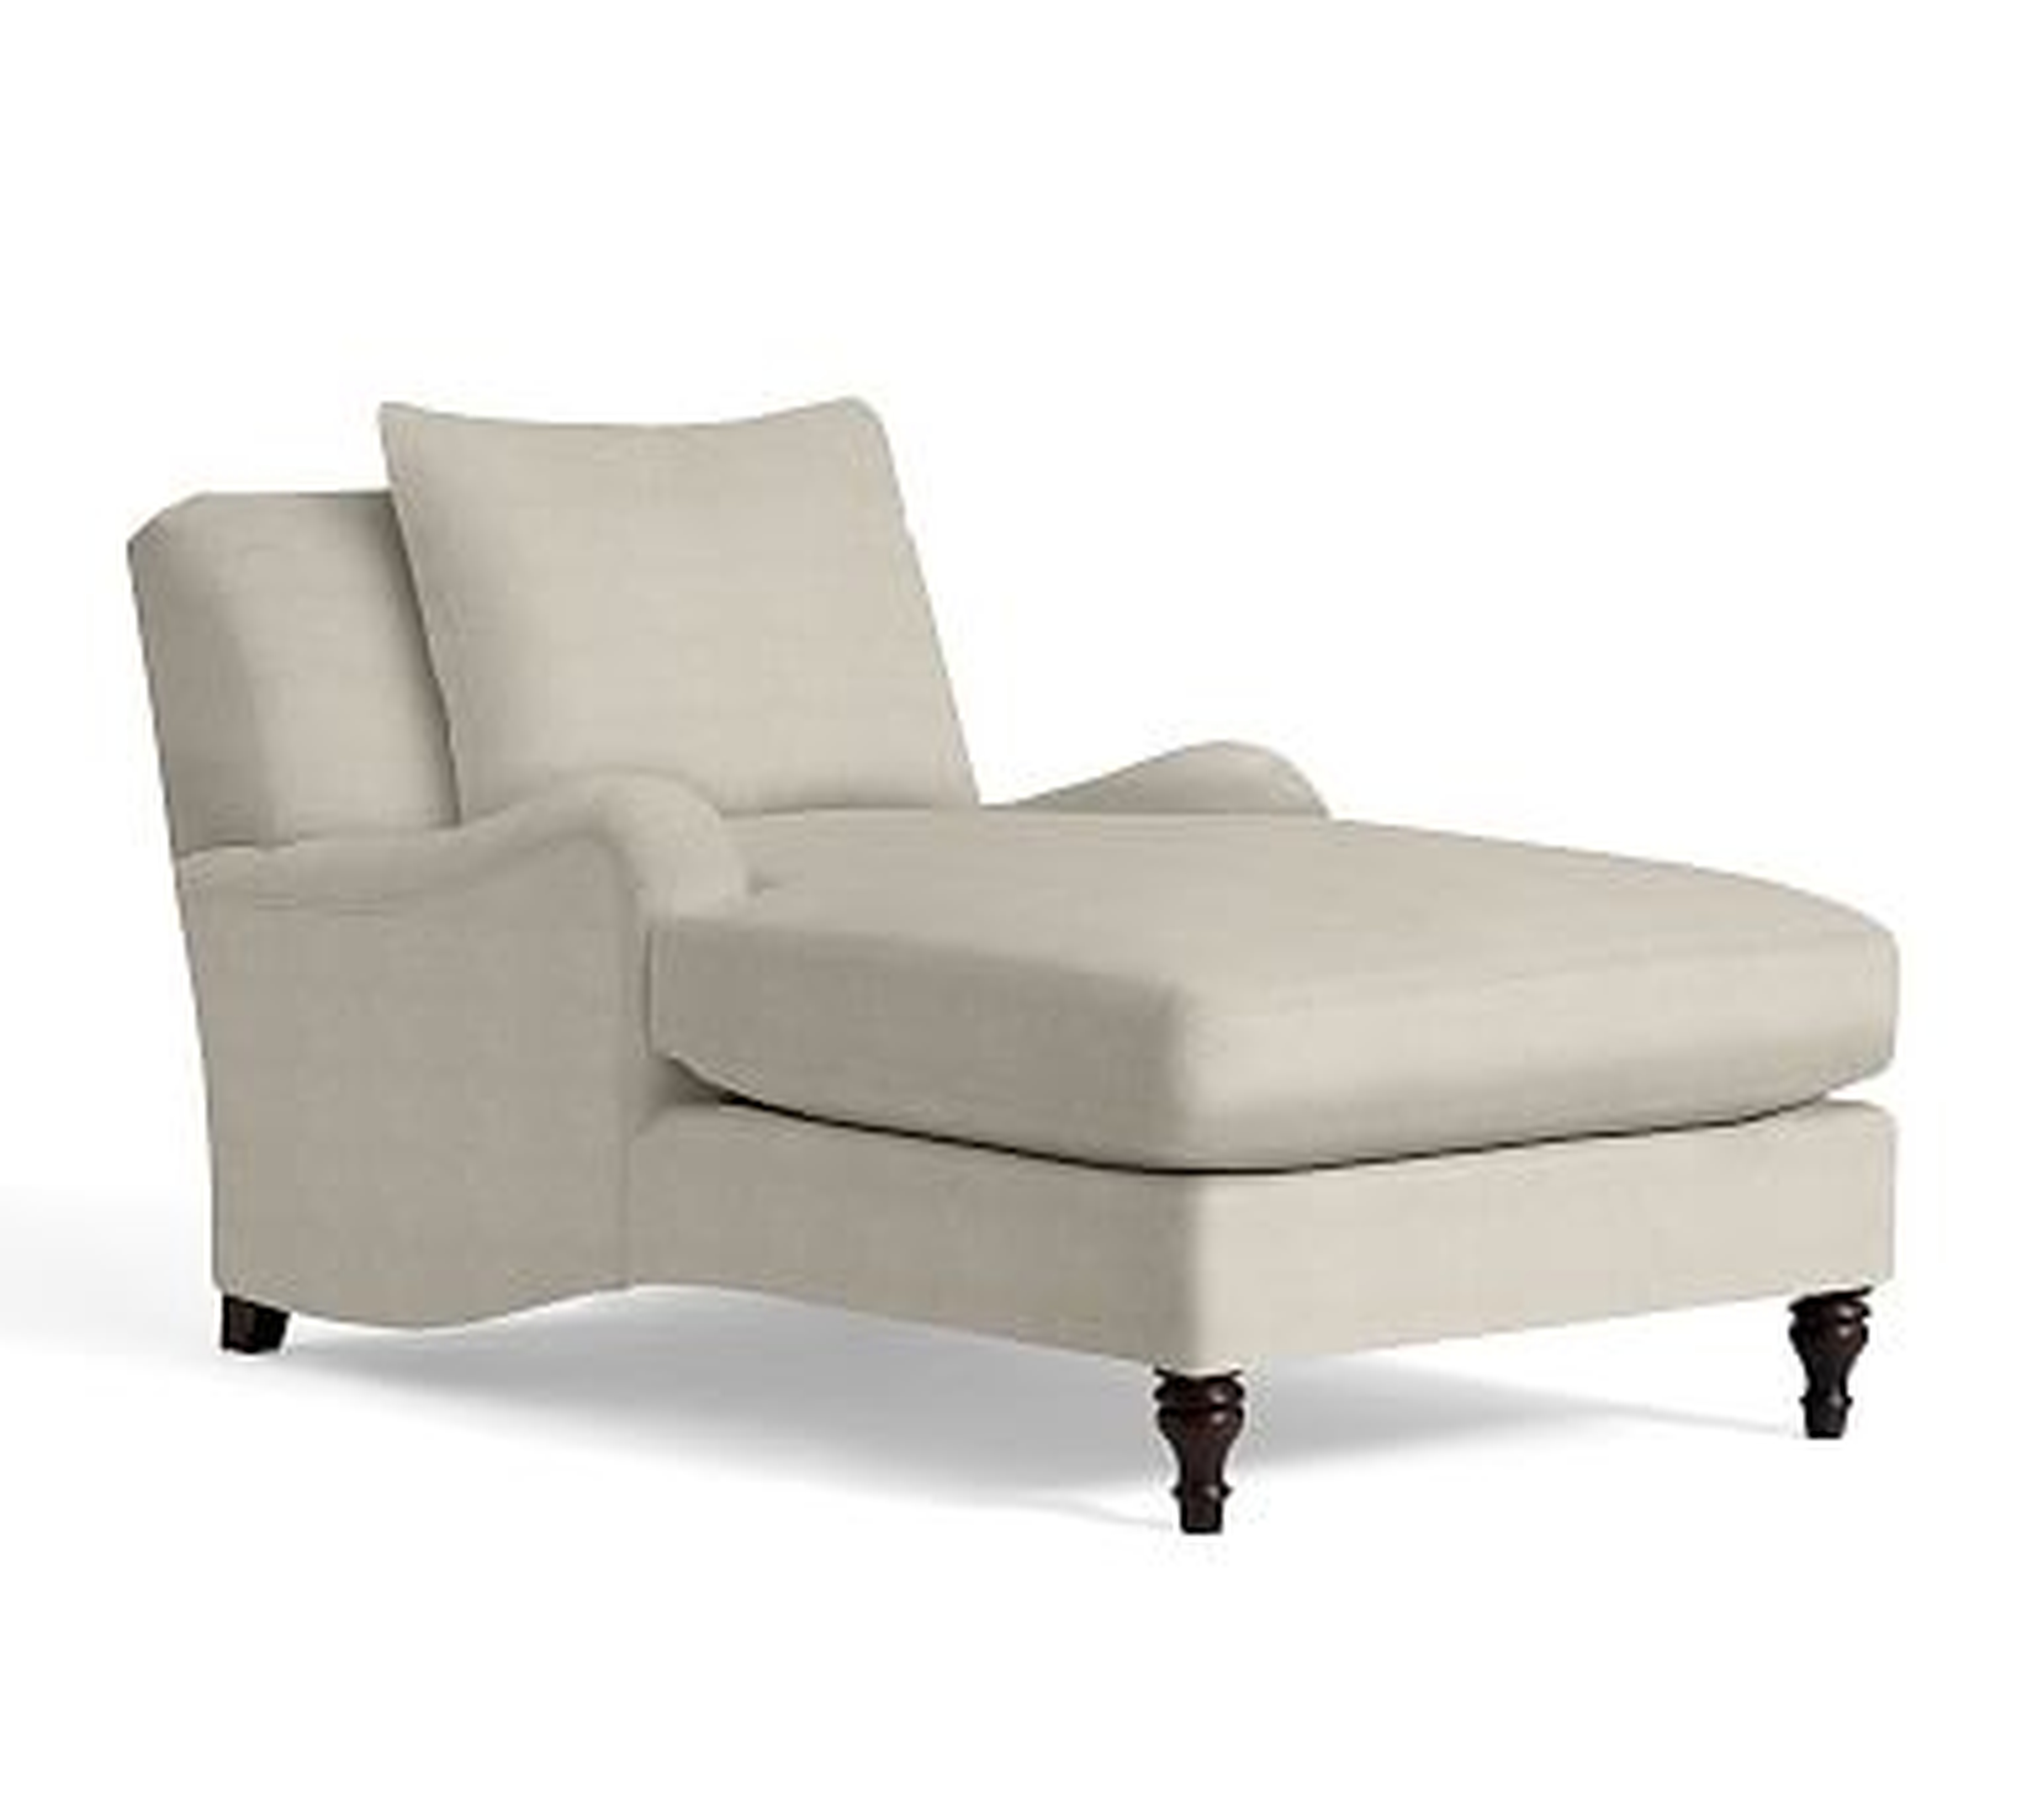 Carlisle English Arm Upholstered Chaise Lounge, Down Blend Wrapped Cushions, Performance Heathered Tweed Pebble - Pottery Barn